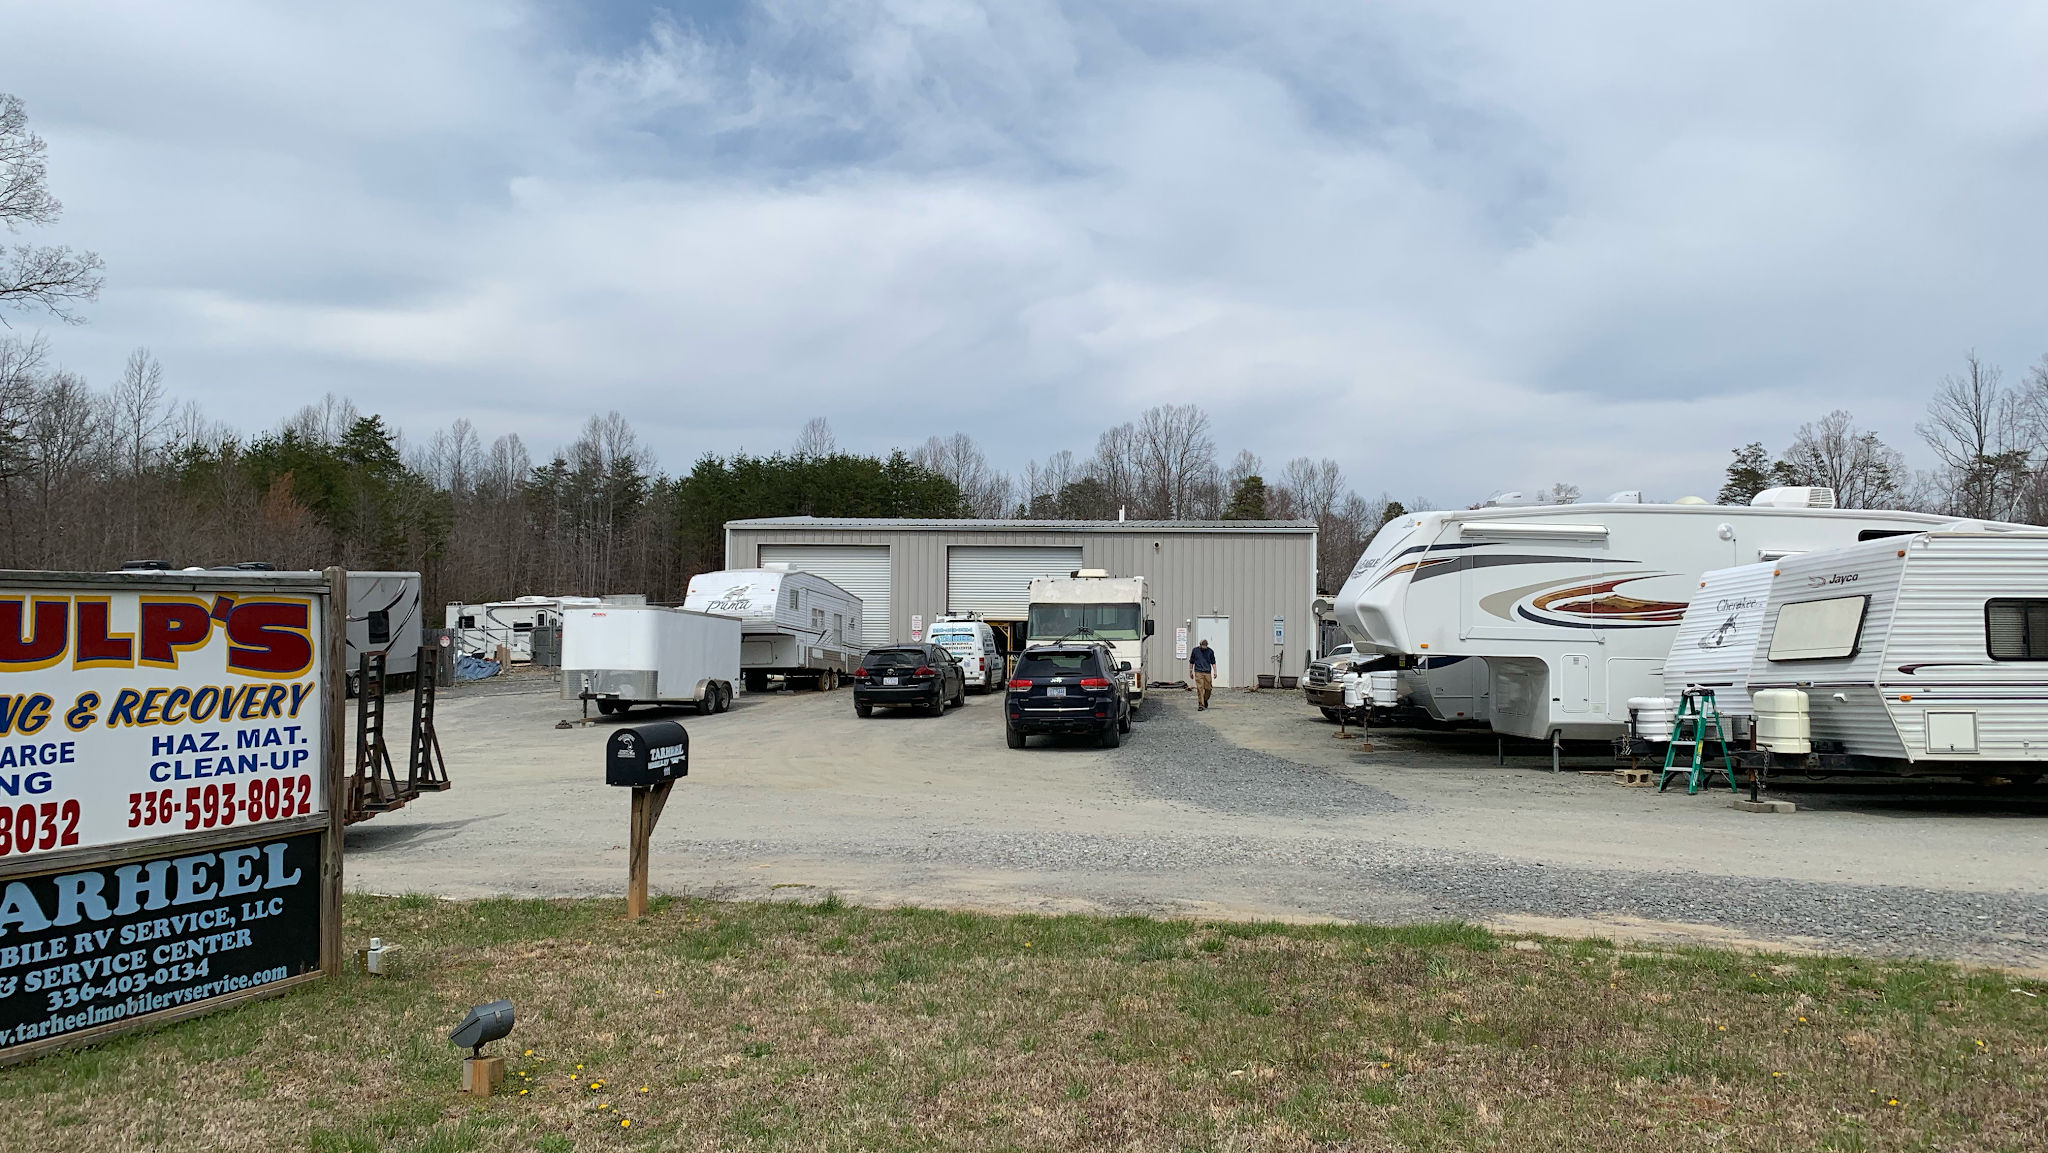 Services & Products Tar Heel Mobile RV Service in Pilot Mountain NC